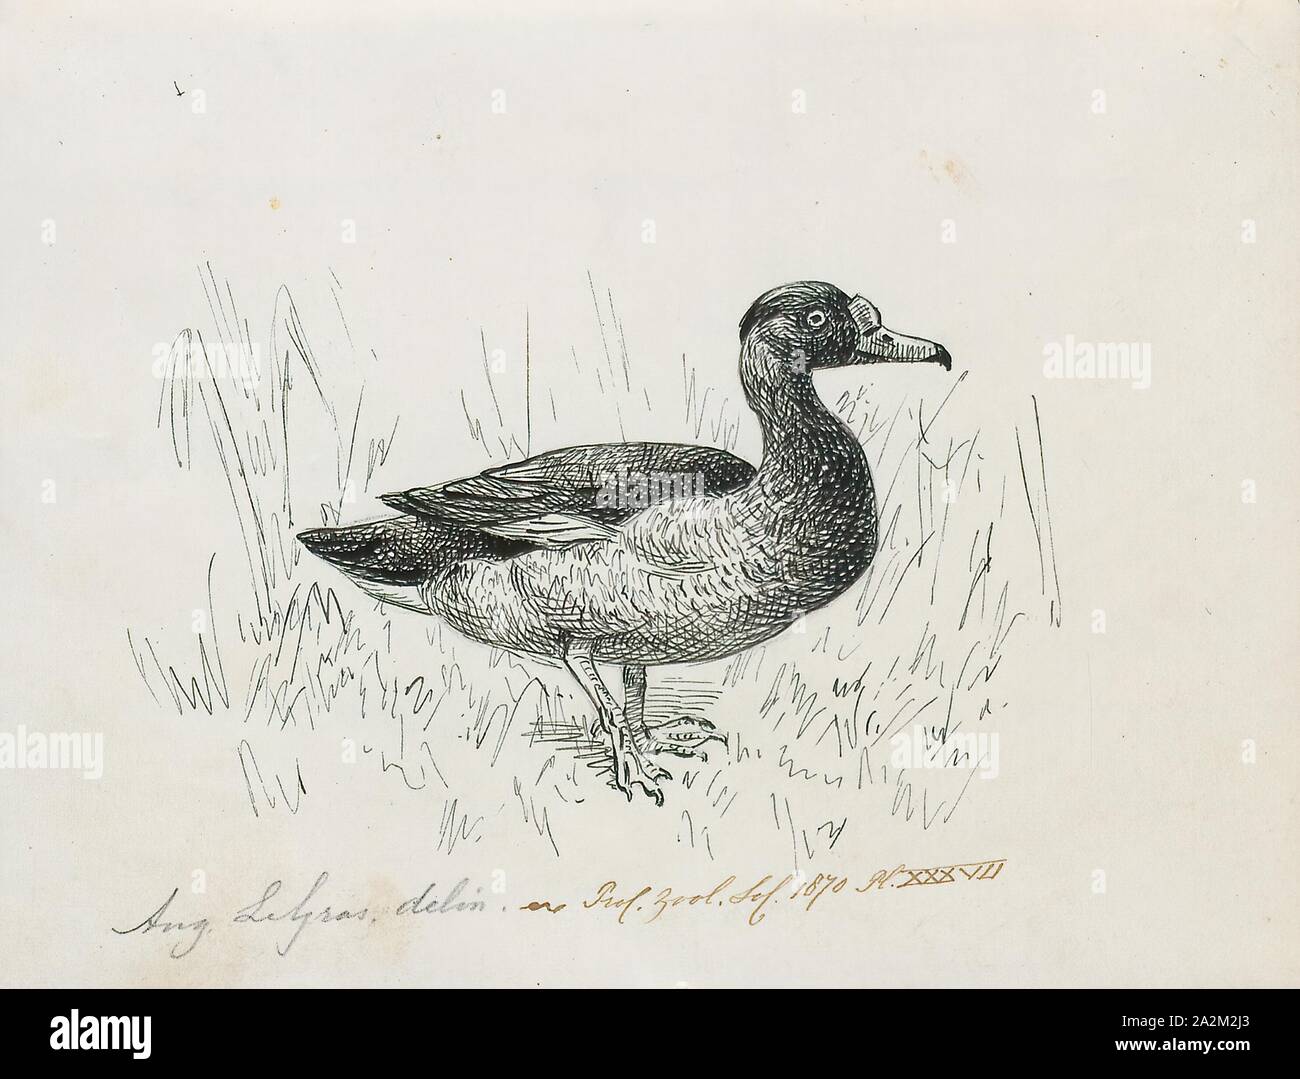 Aythya peposaca, Print, Aythya is a genus of diving ducks. It has twelve described species. The name Aythya comes from the Ancient Greek word αυθυια, aithuia, which may have referred to a sea-dwelling duck or an auklet., 1864-1915 Stock Photo